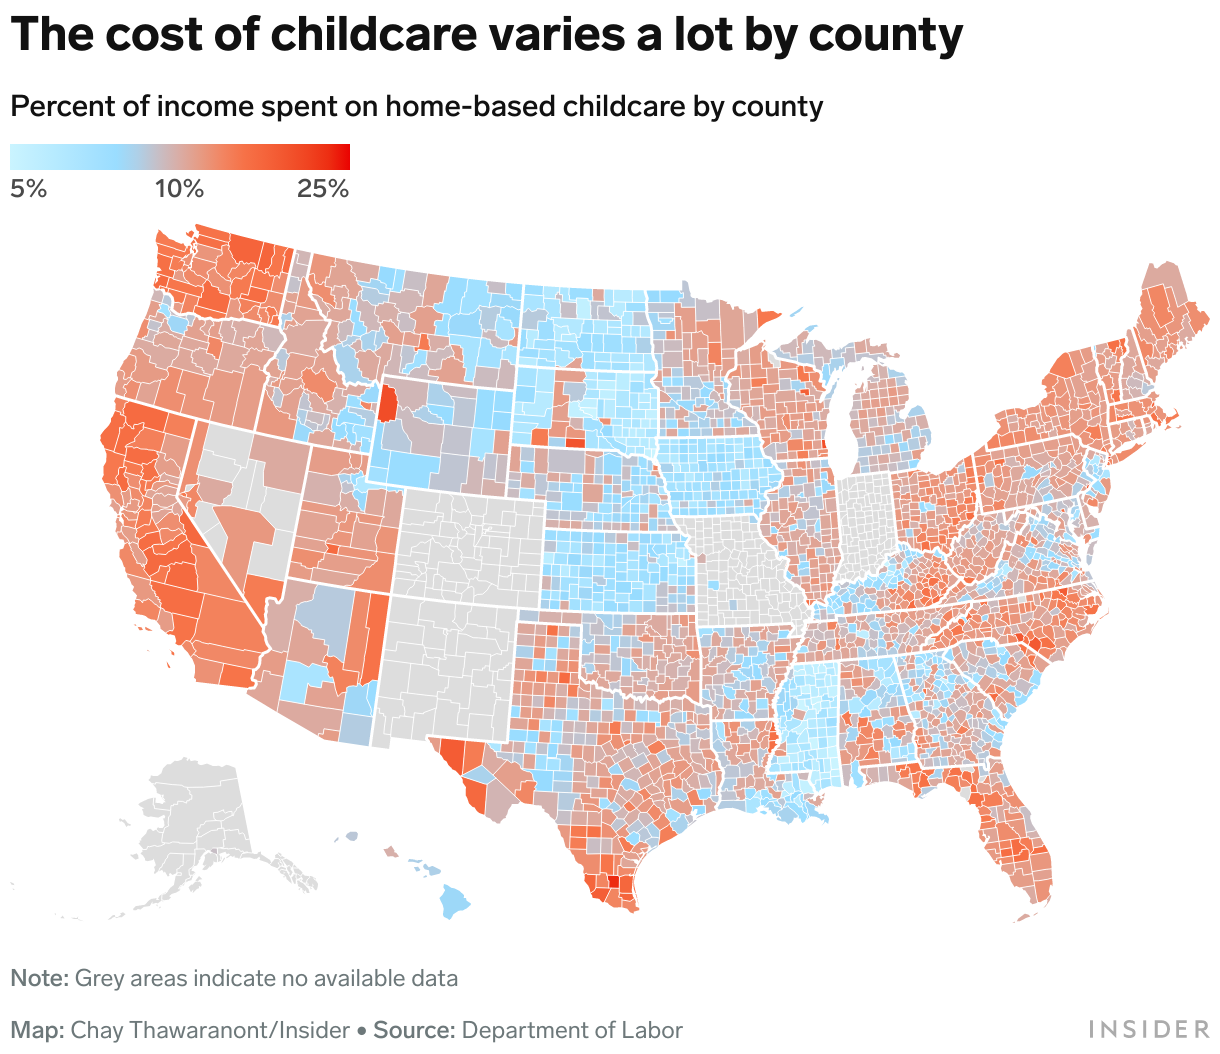  A US choropleth map showing the cost of childcare by county